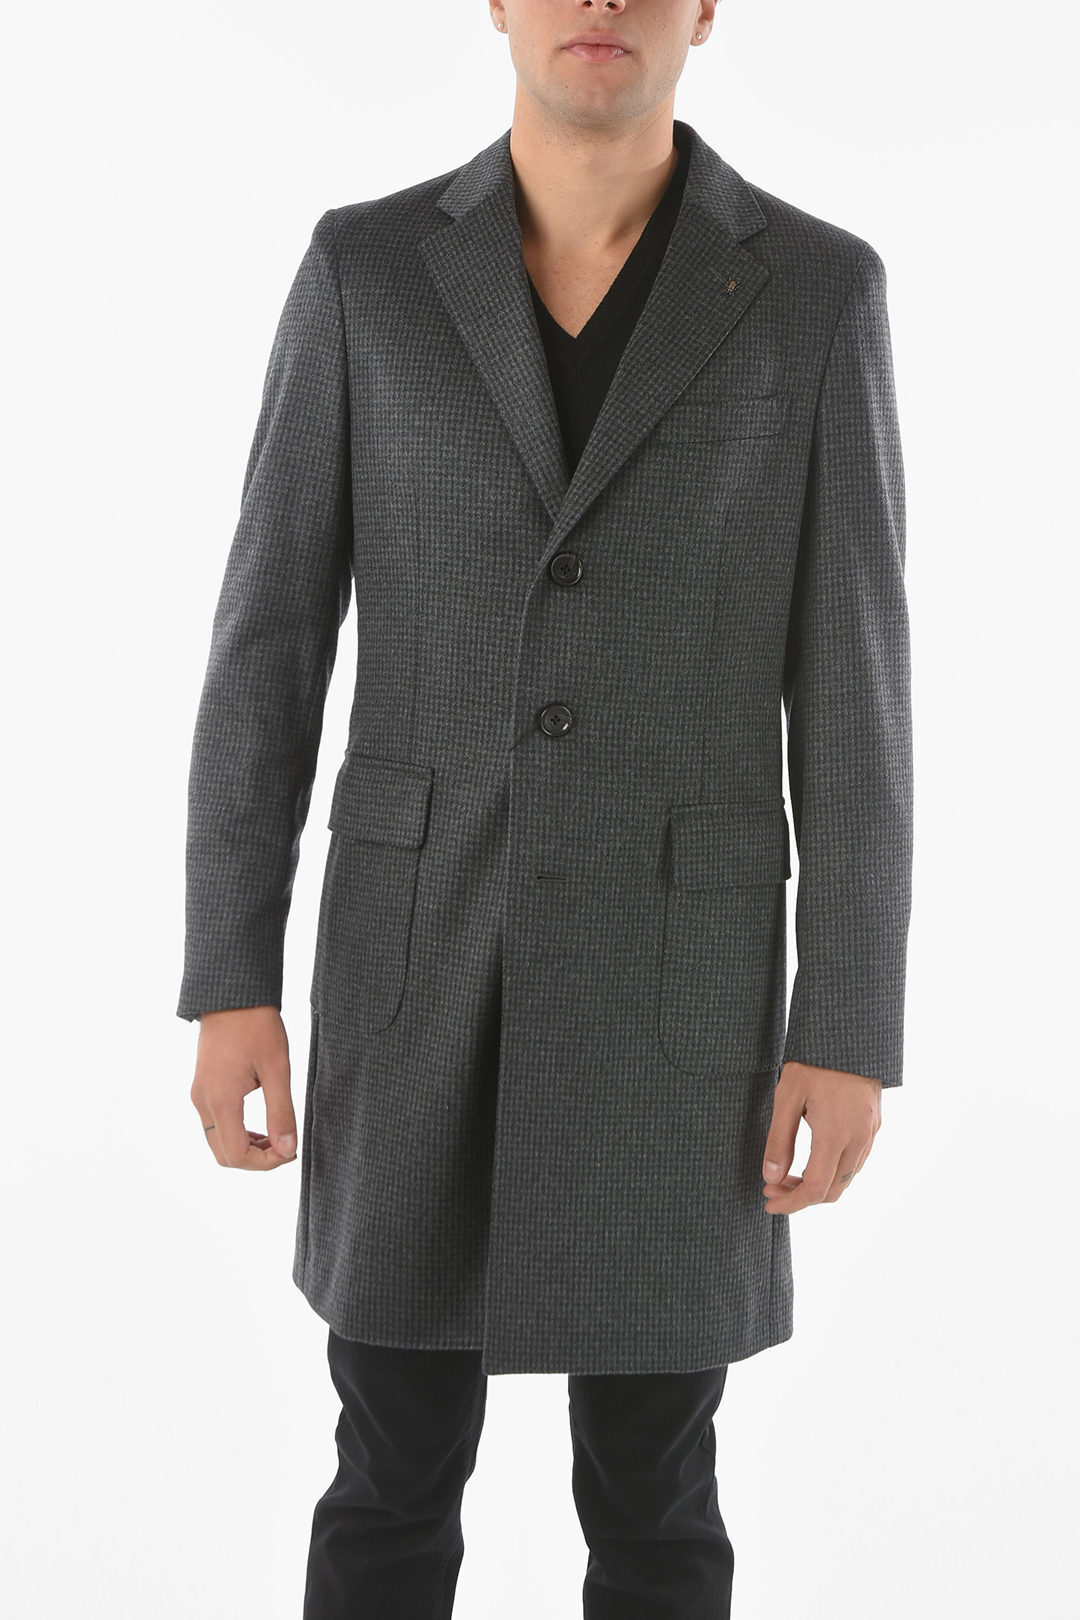 CORNELIANI コルネリアーニ コート 901Z02 0982173 013 メンズ CC COLLECTION HOUNDSTOOTH PATTERNED PURE CASHMERE COAT 【ラッピング無料】 dkのサムネイル